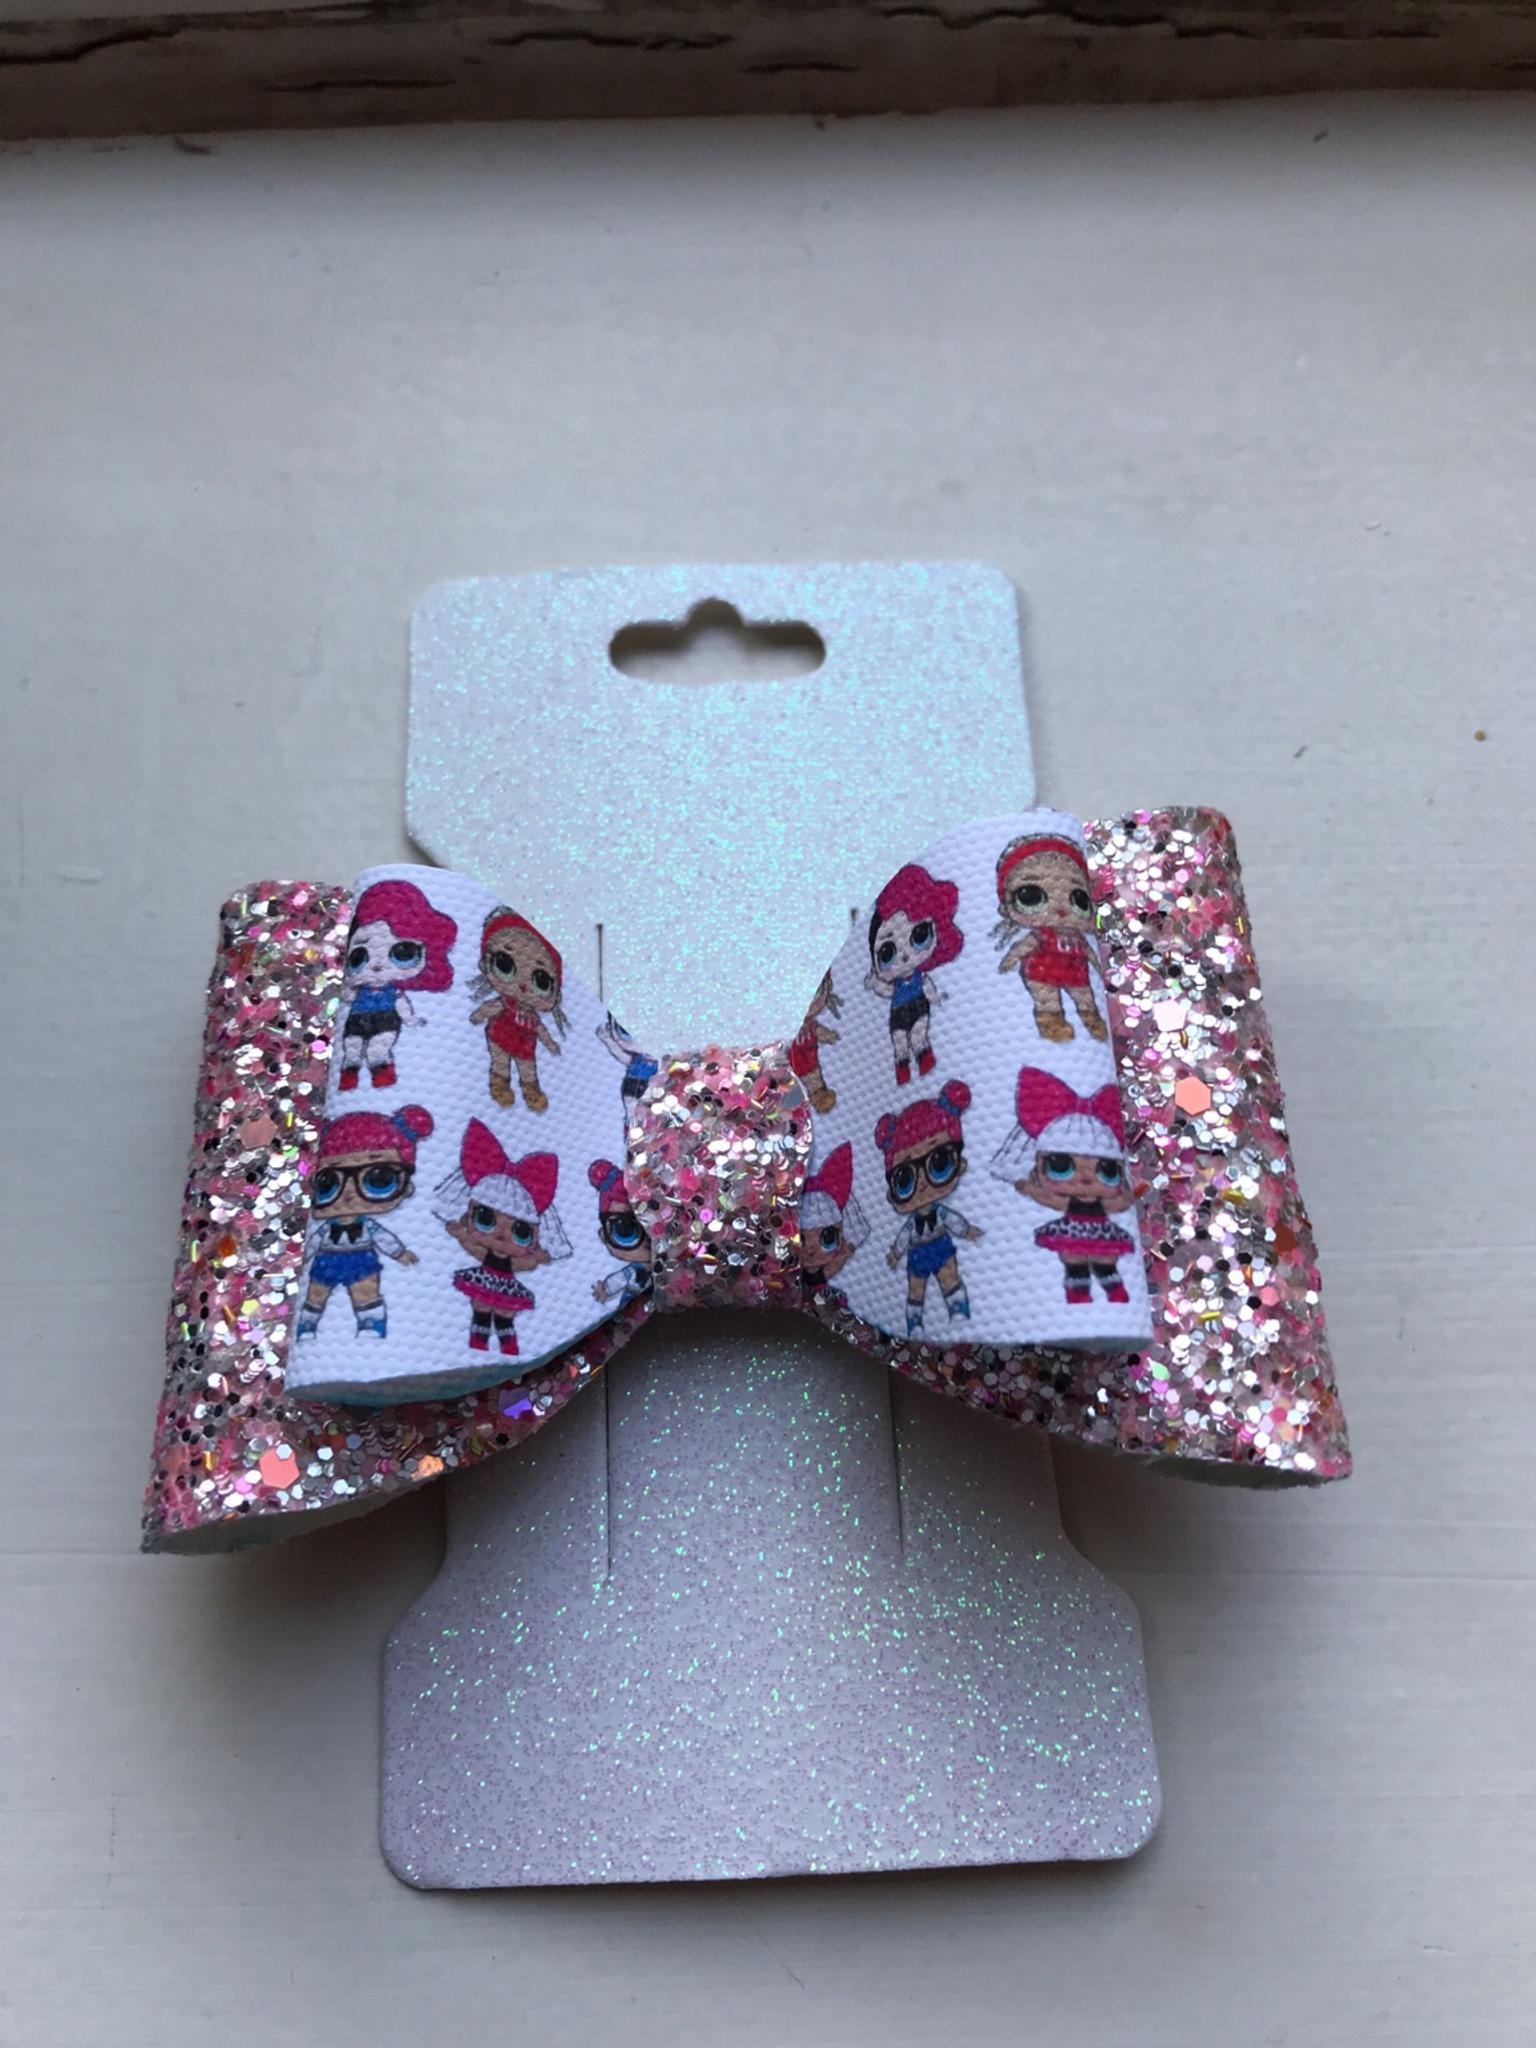 LOL Glitter Surprise Hair Bows x2 Pink Hair Ties Clips Genuine Official L.O.L